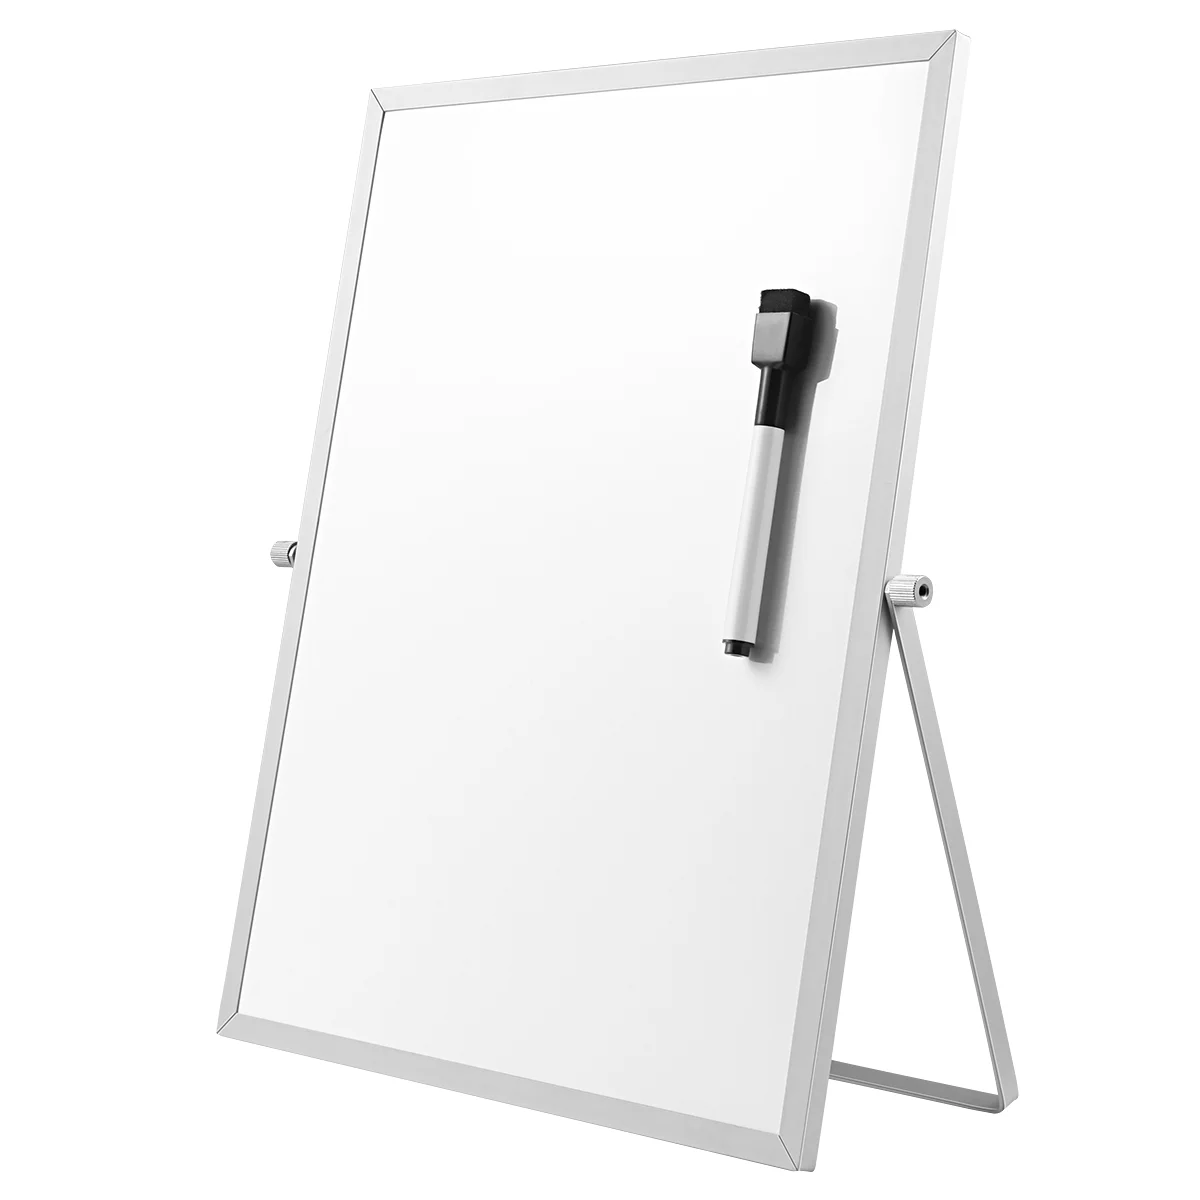 Magnetic White Board Dry Erase Board Double Sided Practical with Stand White Board for Office School Home